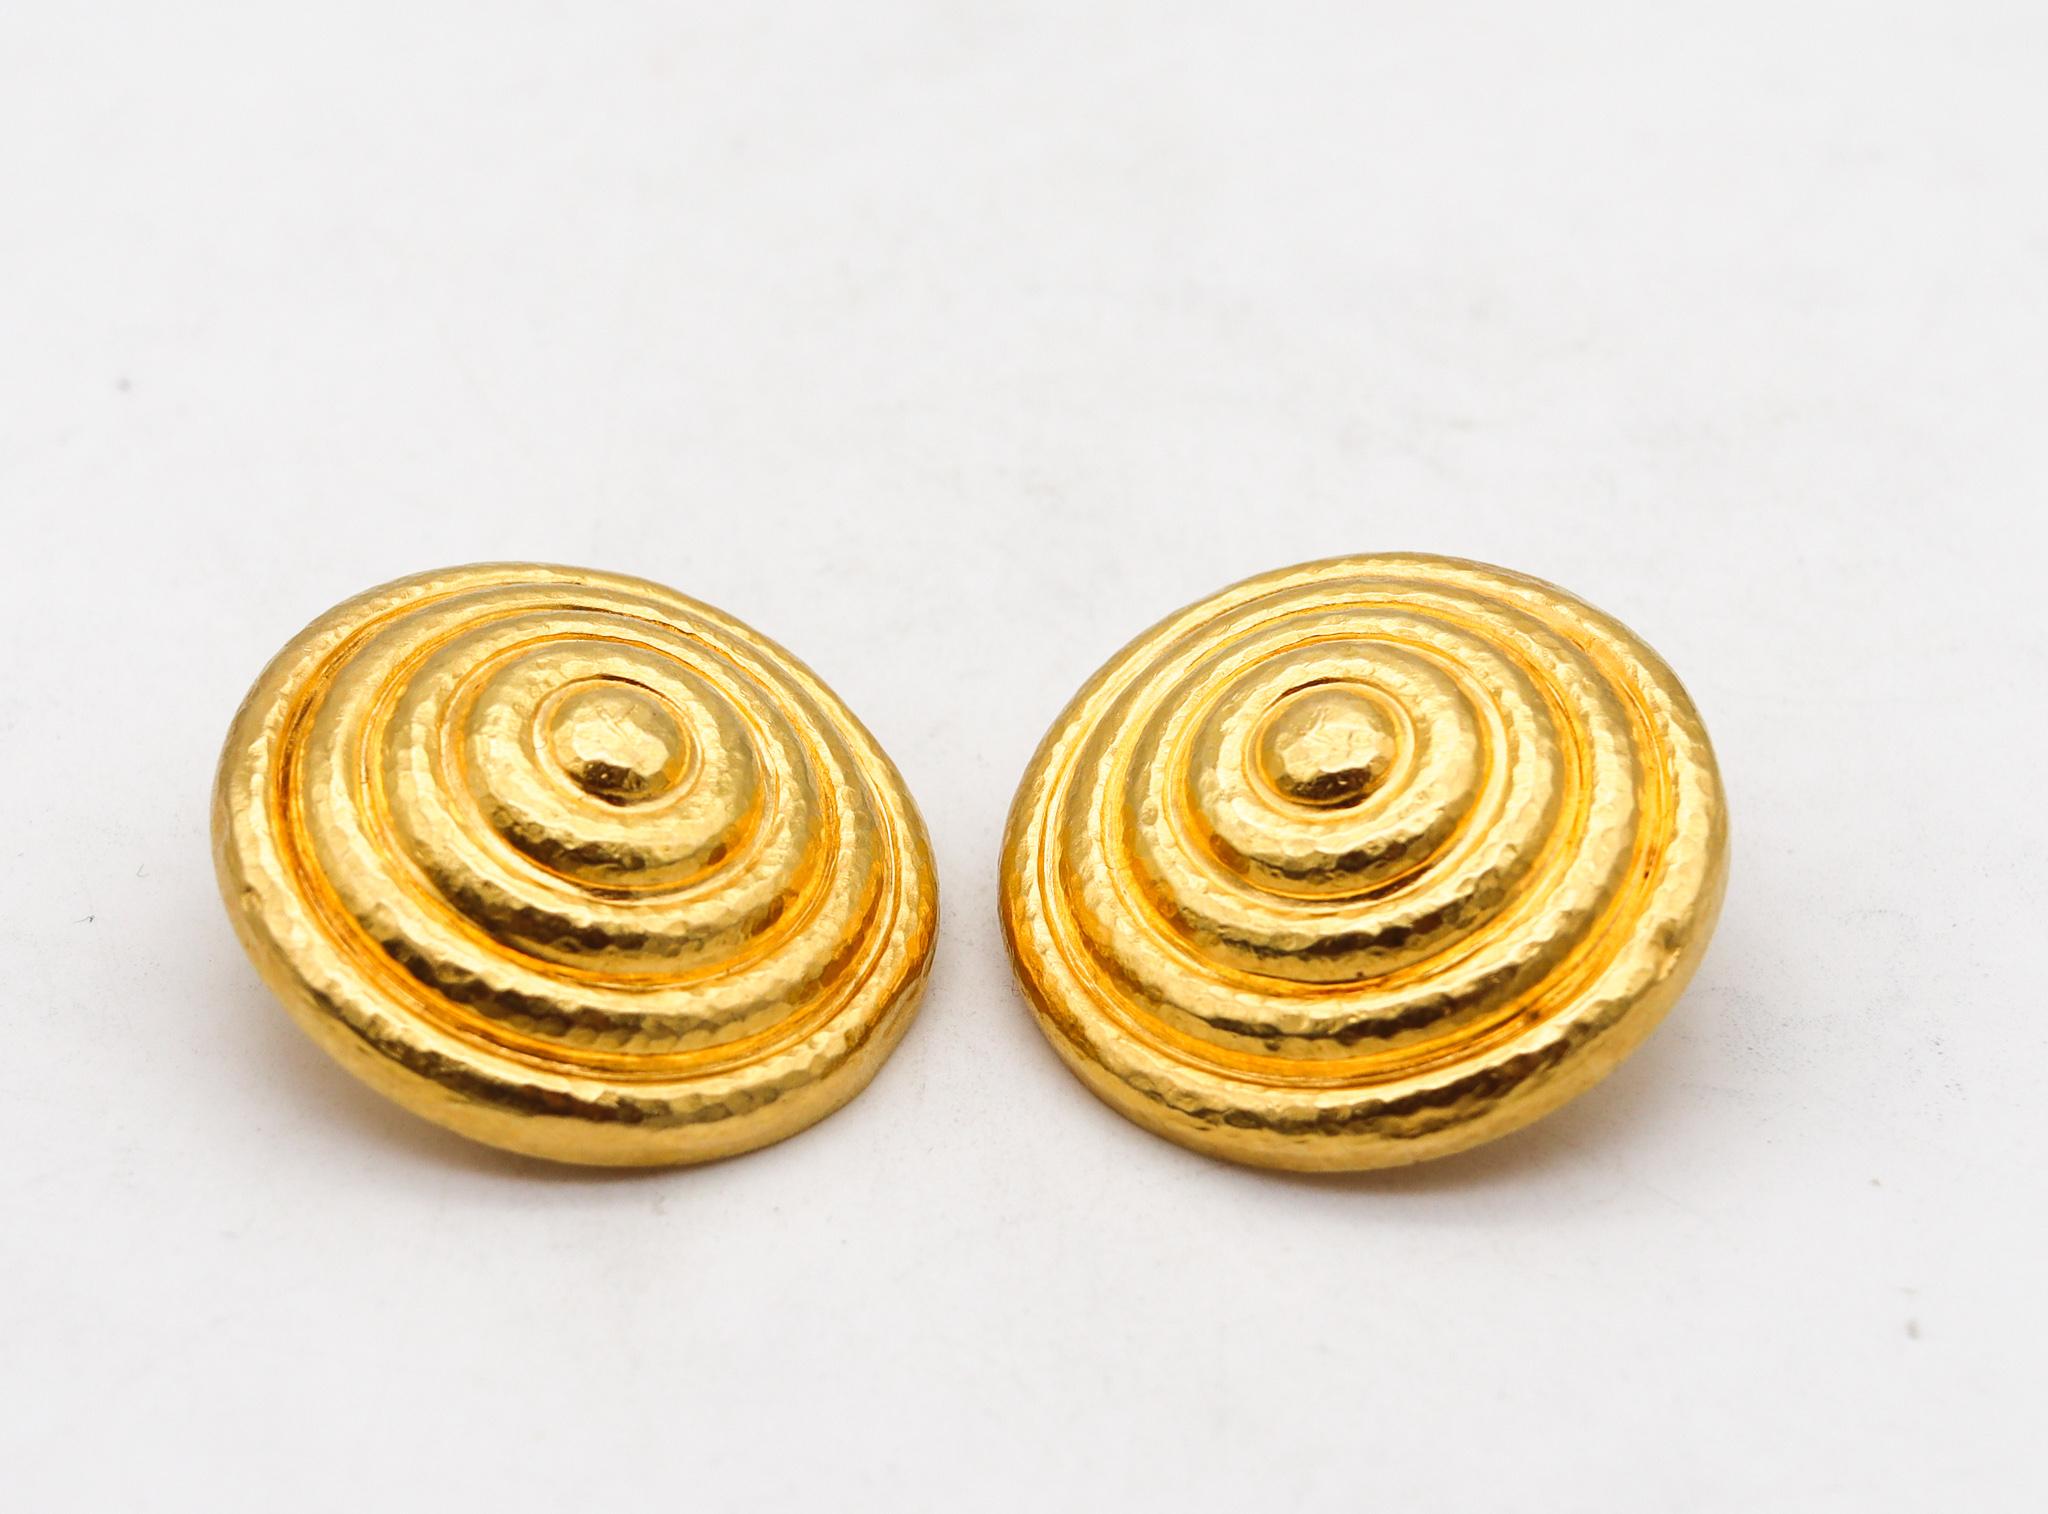 A pair of round Earrings designed by Ilias Lalaounis.

Beautiful statement round shield earrings, created in Greece by the jewelry house of Lalaounis back in the 1970's. These gorgeous vintage bold pair are part of the collection named Minoans and